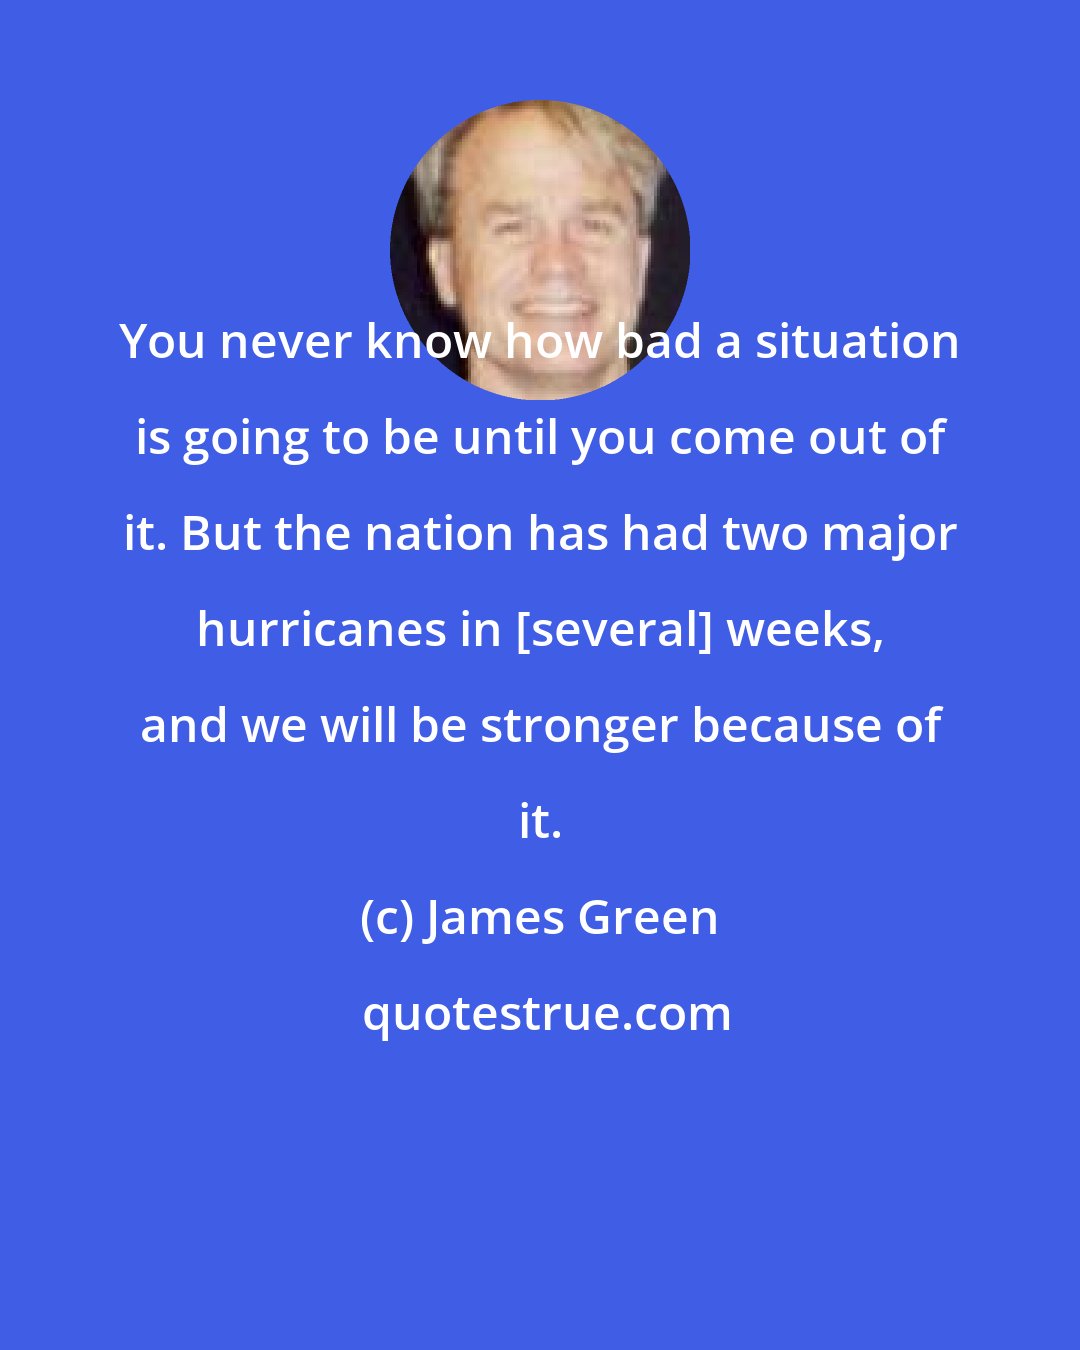 James Green: You never know how bad a situation is going to be until you come out of it. But the nation has had two major hurricanes in [several] weeks, and we will be stronger because of it.